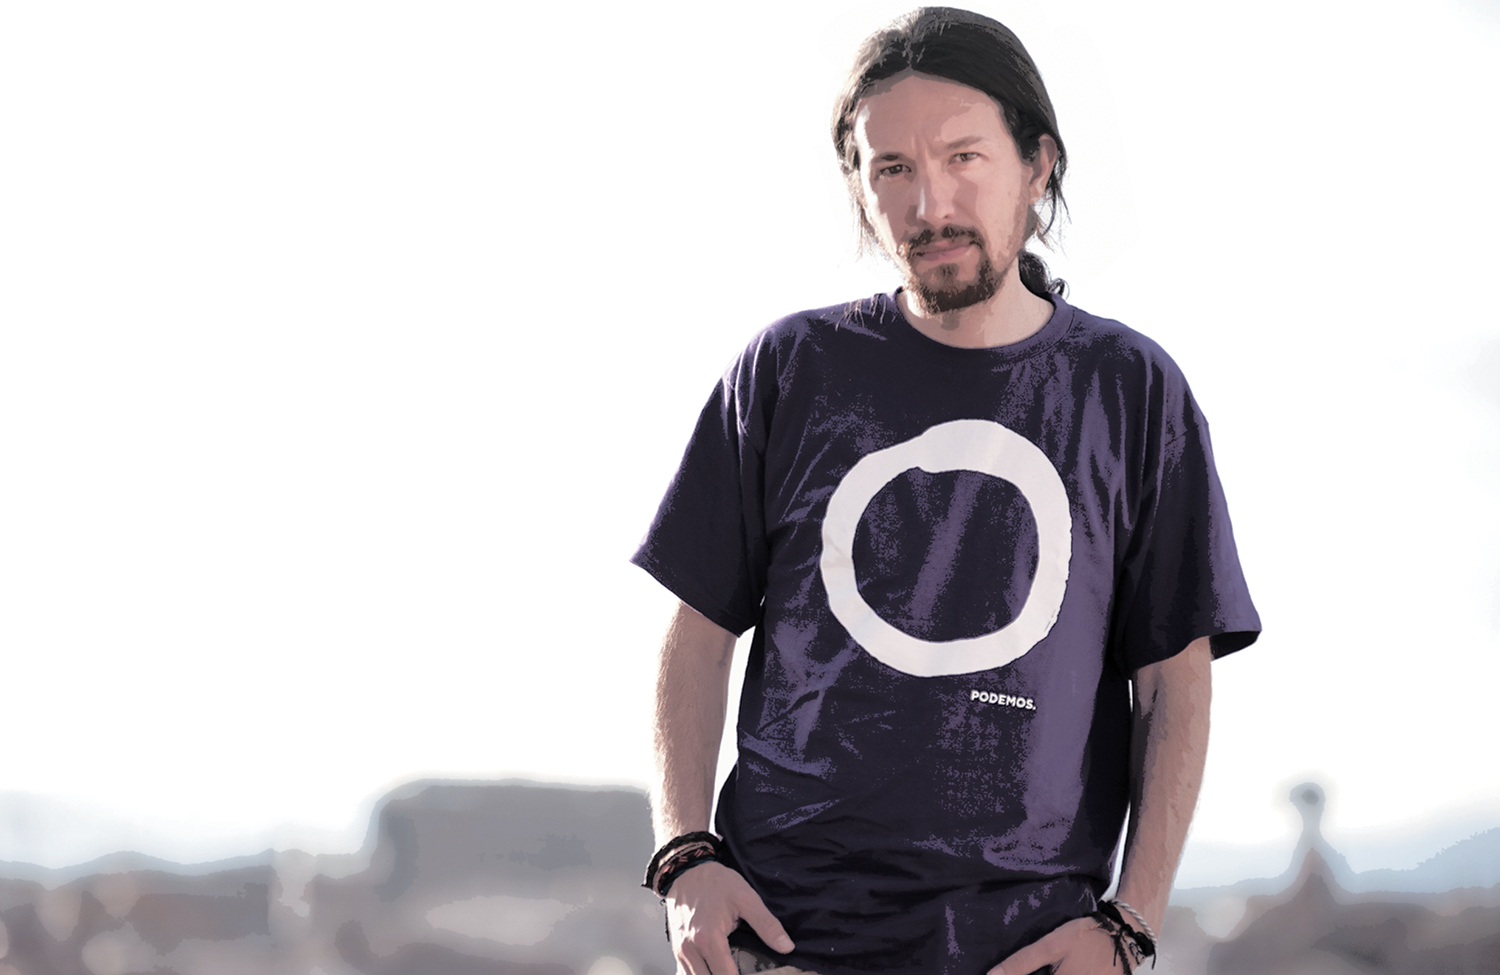 Can Podemos Win in Spain?